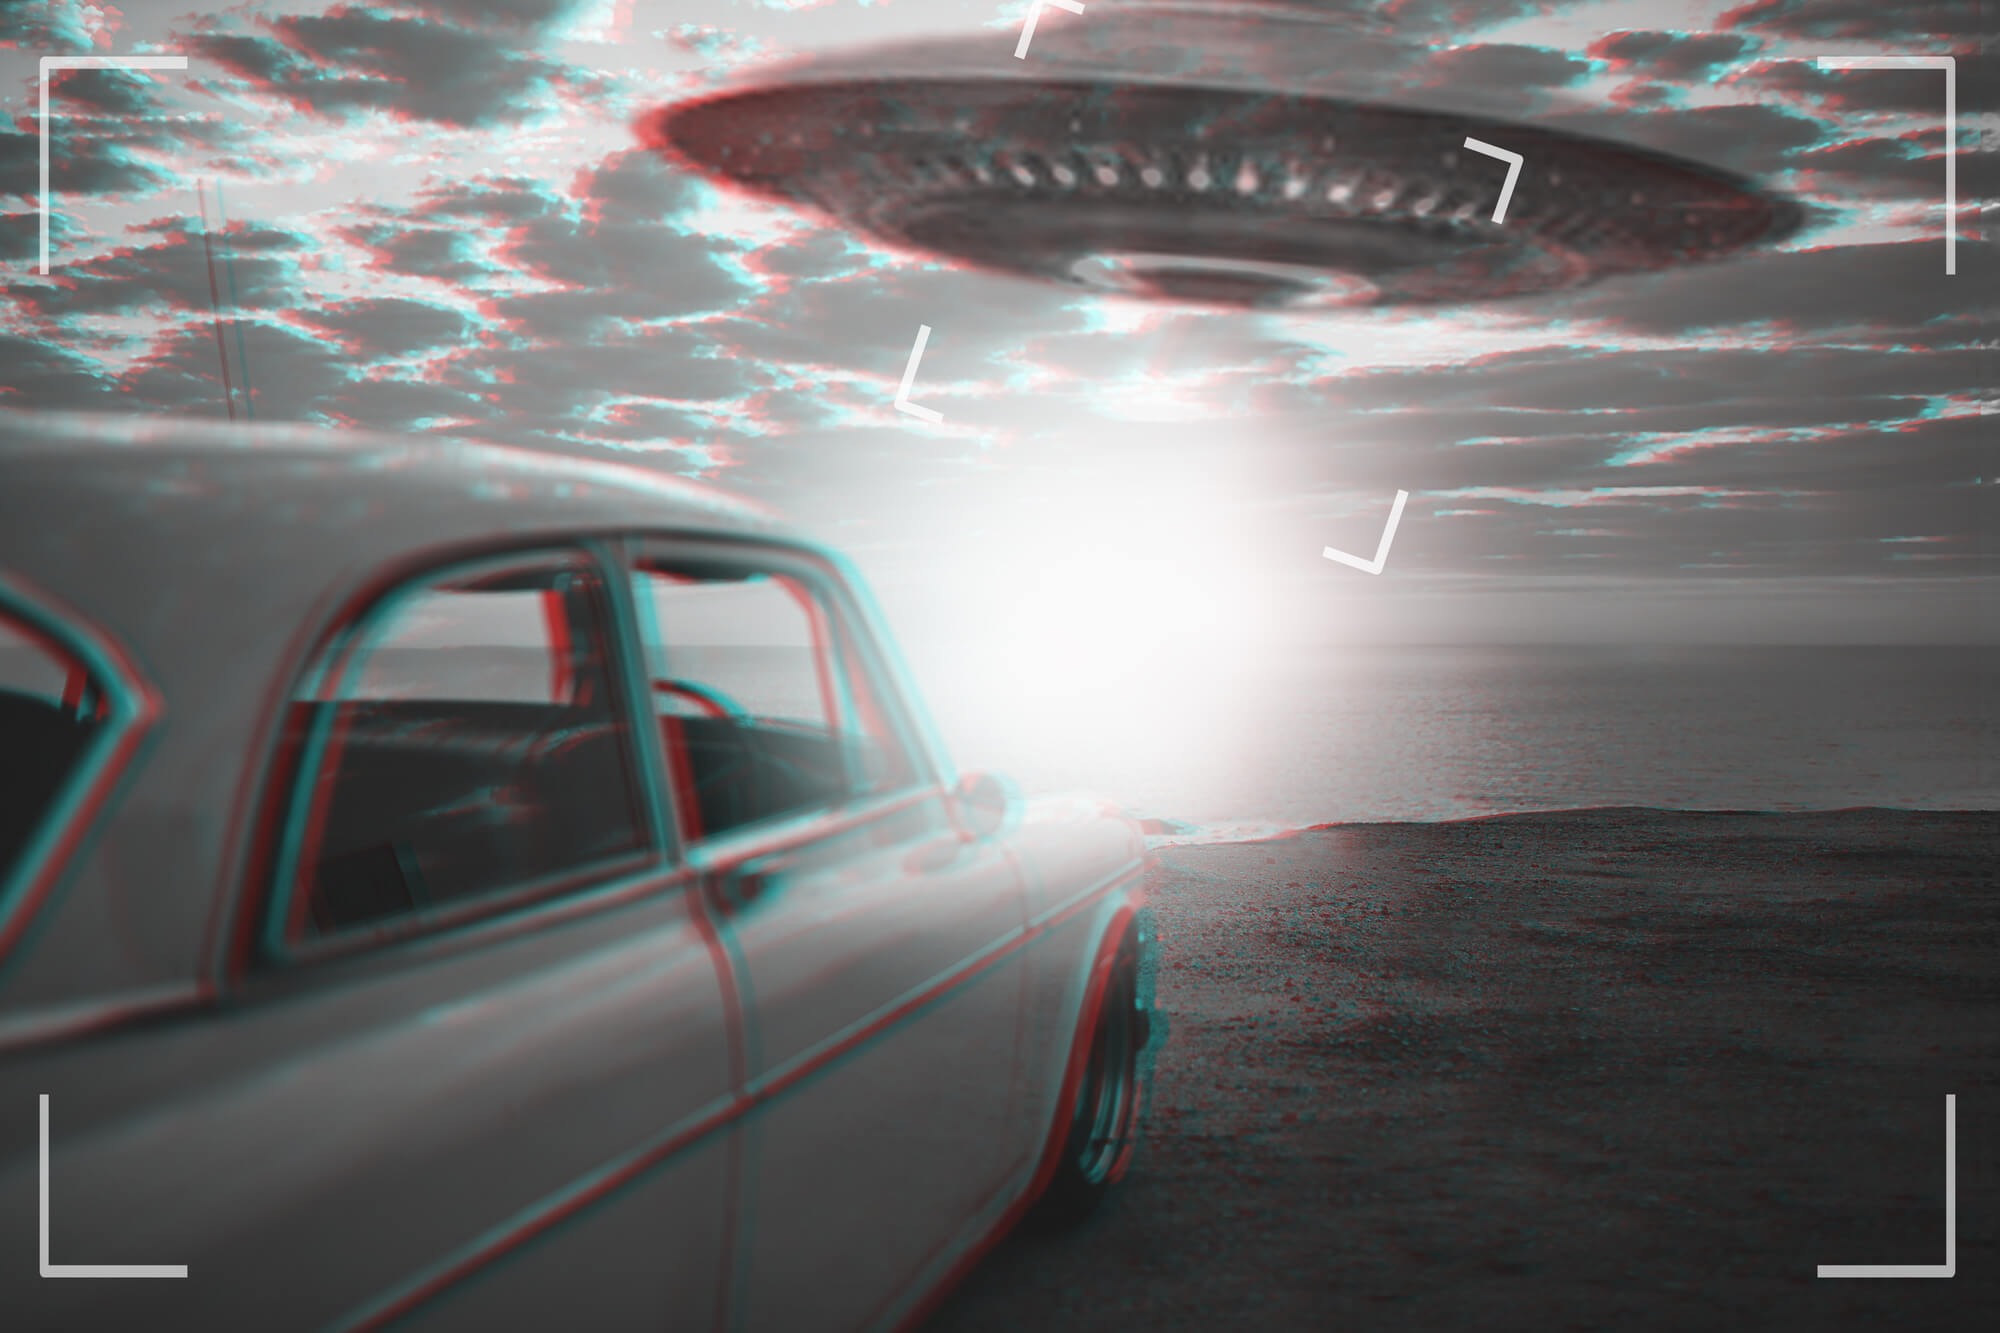 Investigating reports of sightings of unidentified objects - UFOs. Illustration: depositphotos.com